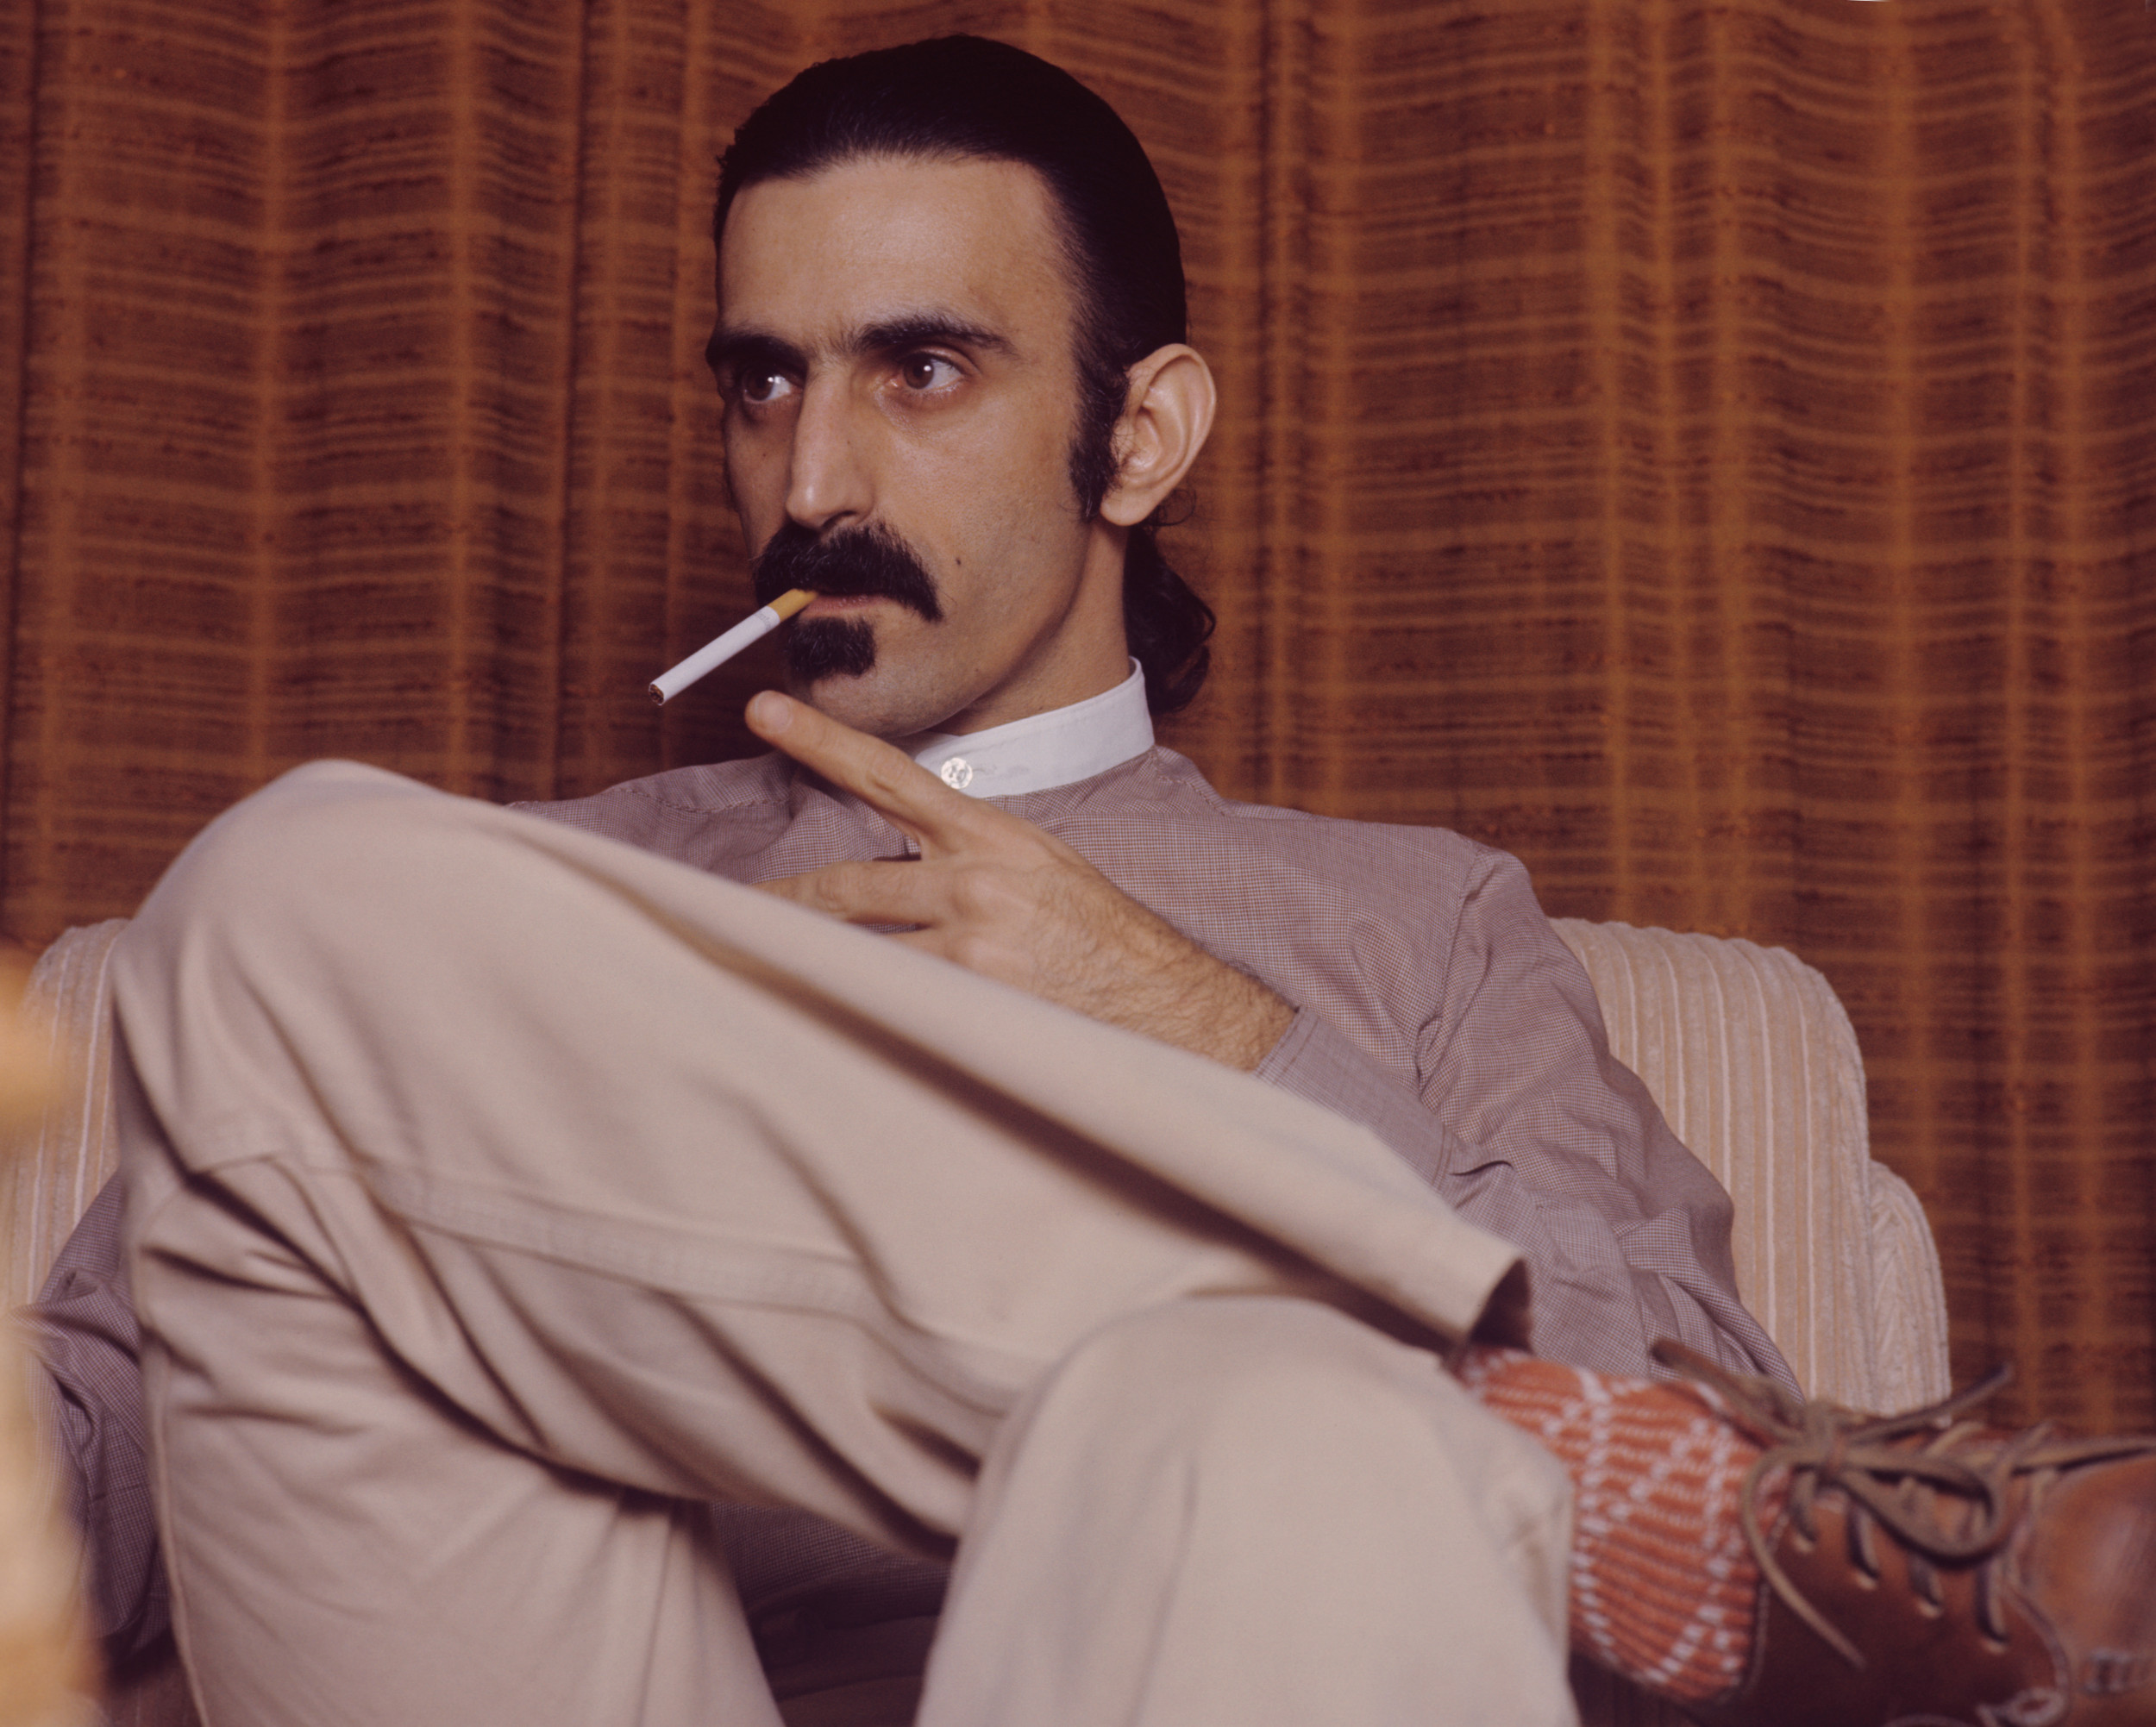 New Frank Zappa Box Set Contains Audio of When He Was Almost